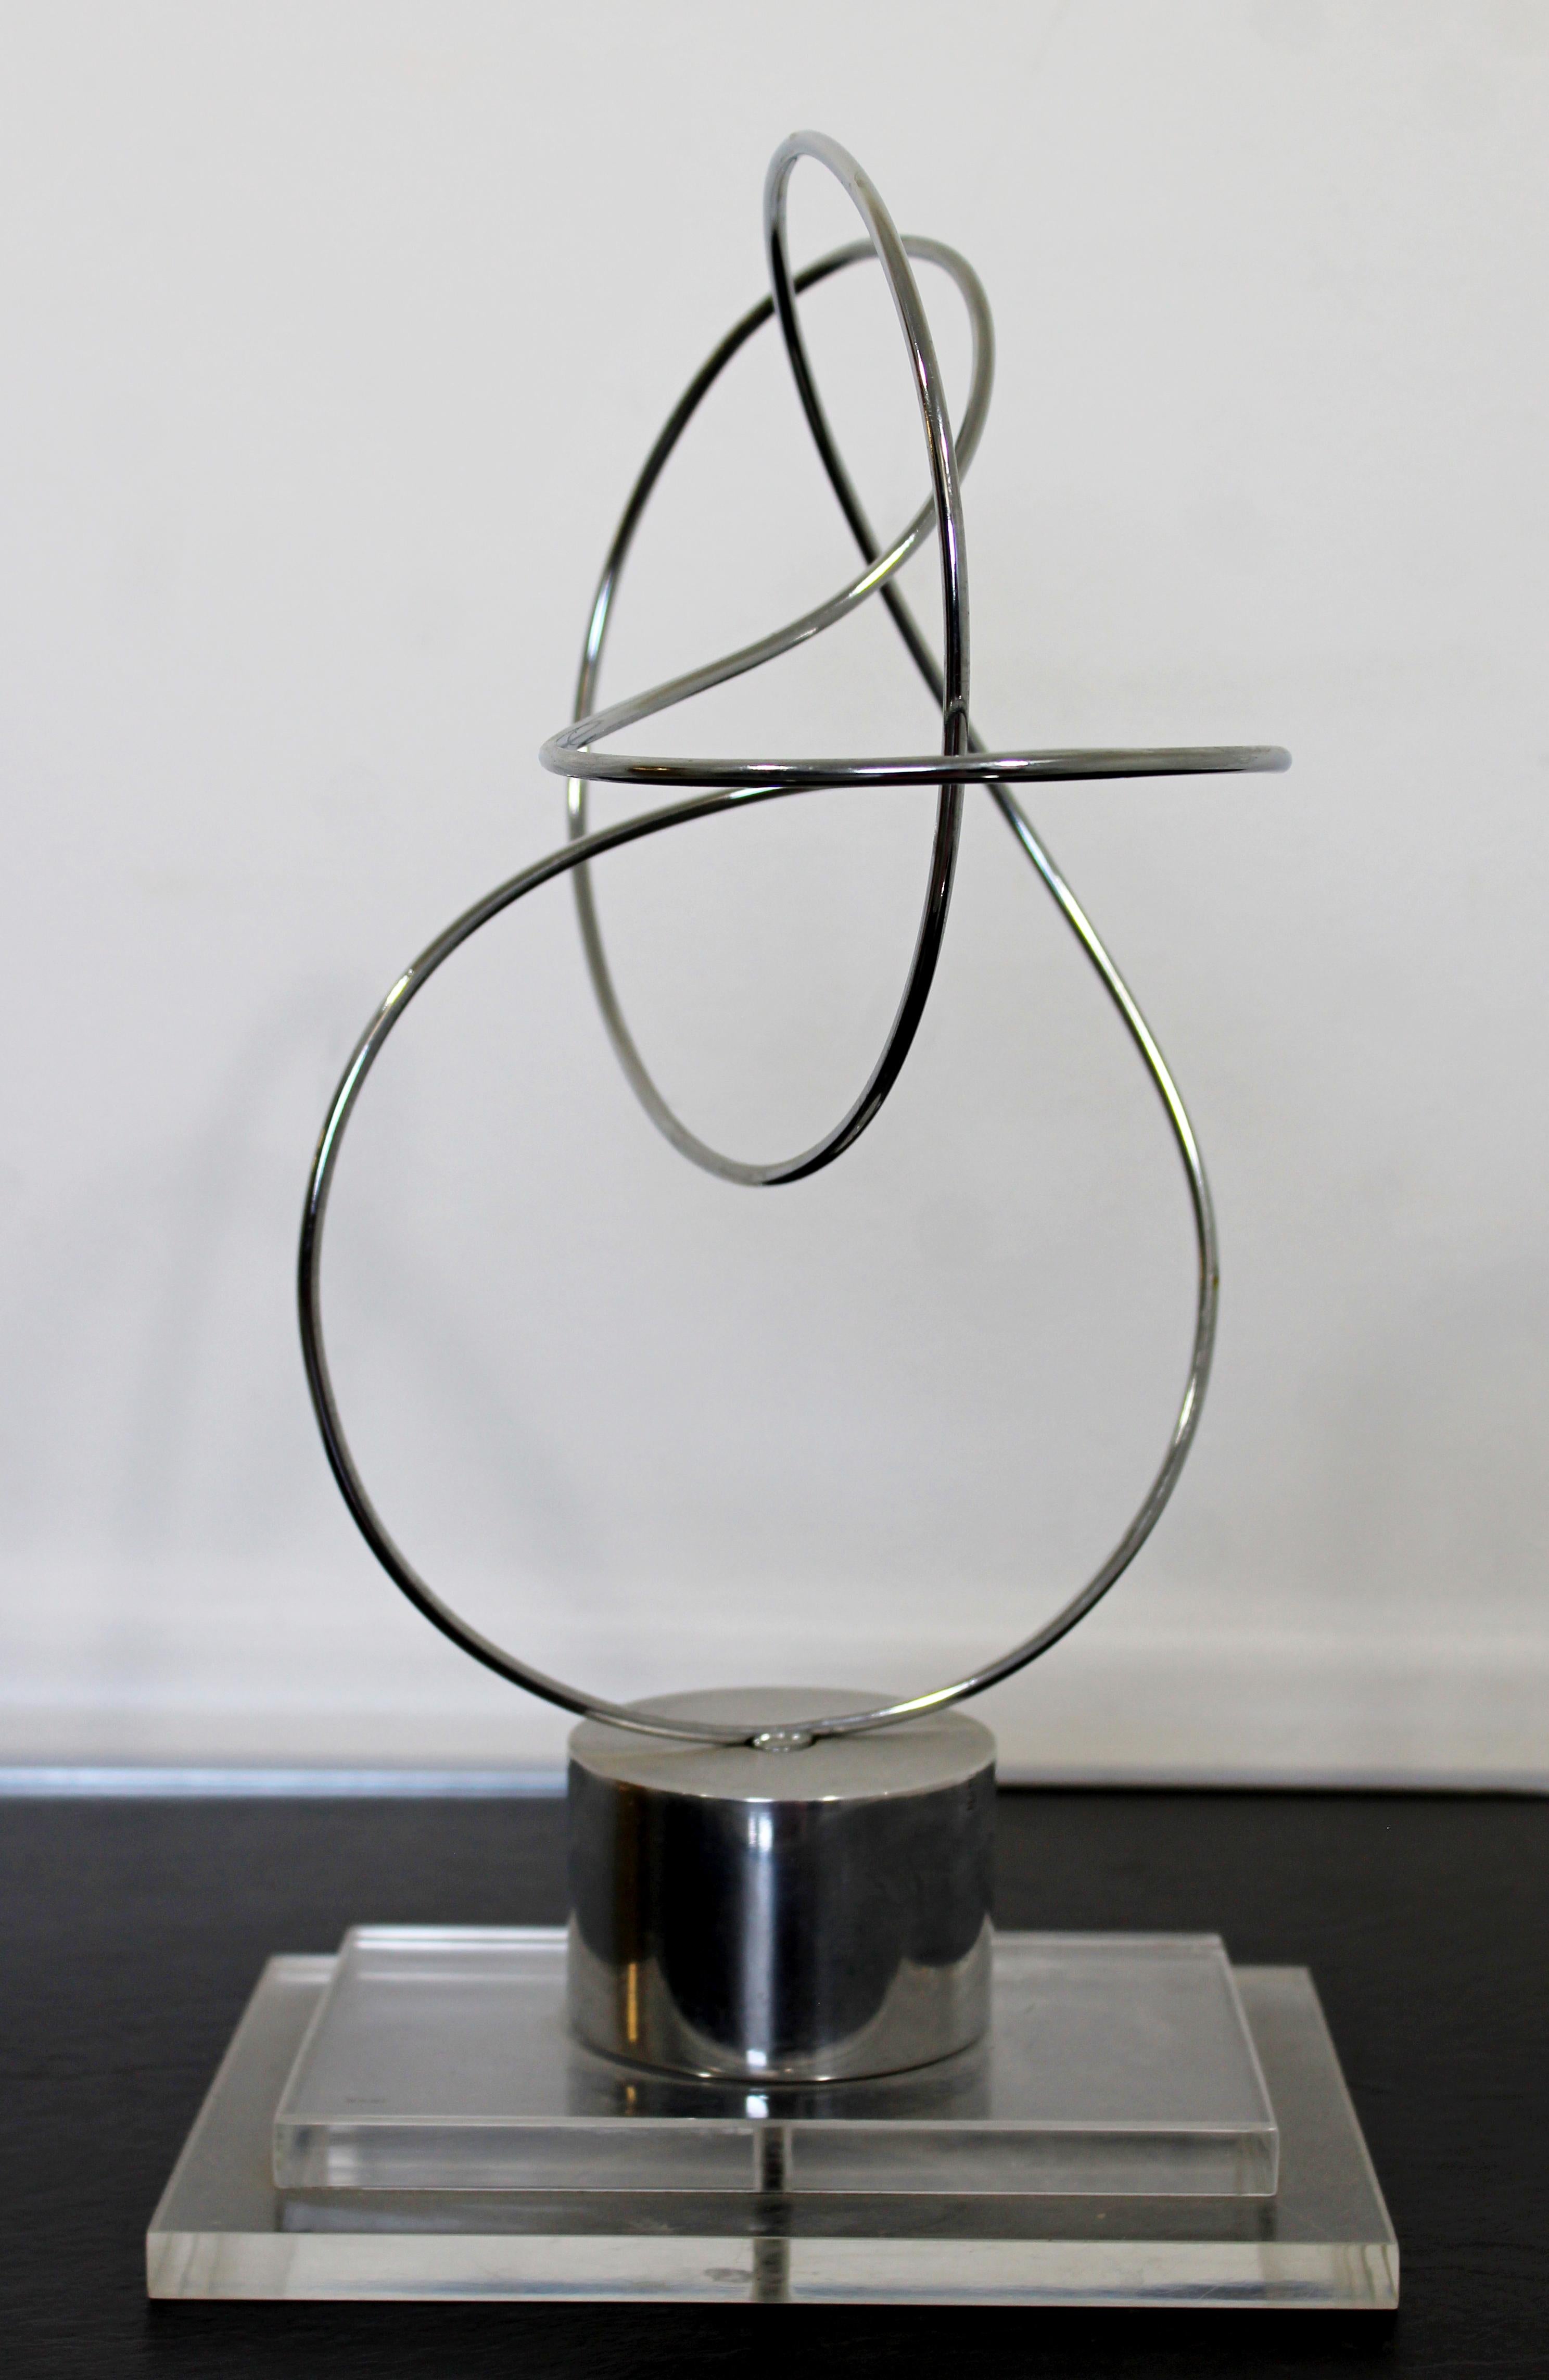 For your consideration is a magnificent modern metal wire and lucite sculpture signed Nani (14 x 8). James Nani (1926-2016) was a Detroit artist for over 50 years and is known internationally for his metal and acrylic sculptures. His work is